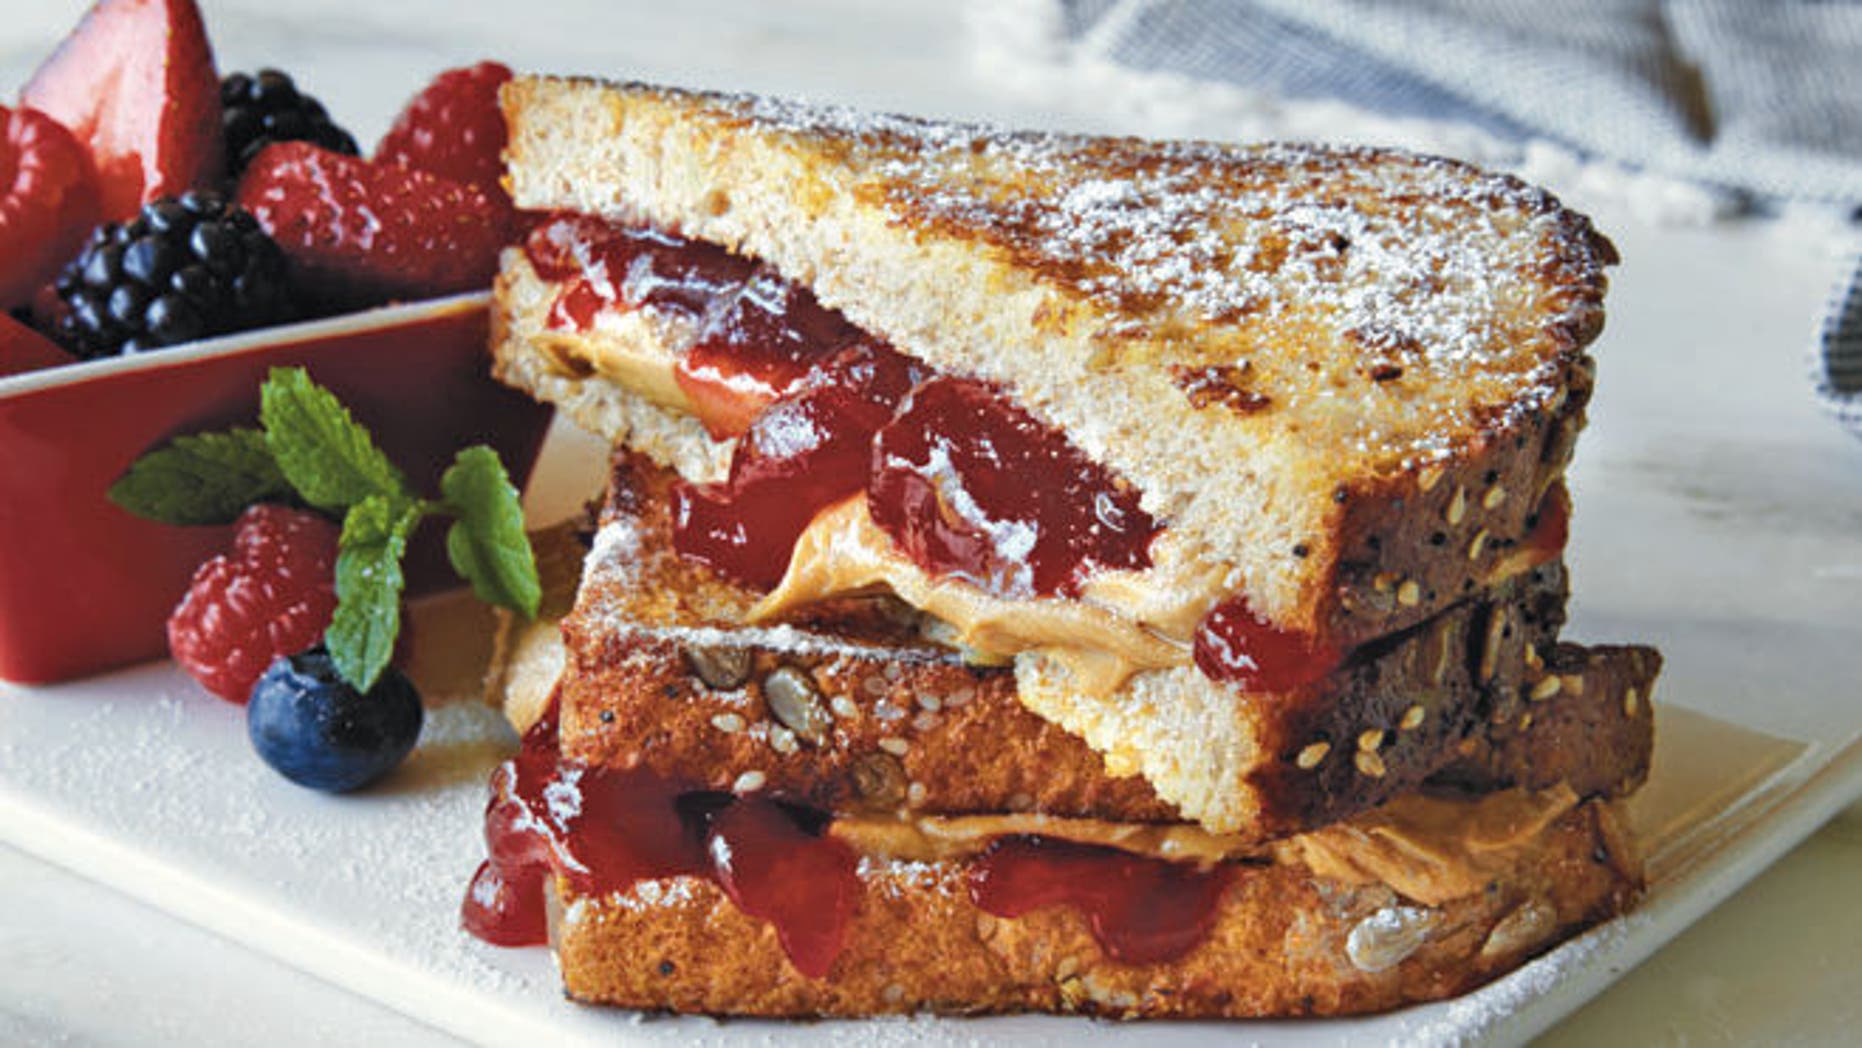 French Toast Peanut Butter and Jelly Sandwiches | Fox News